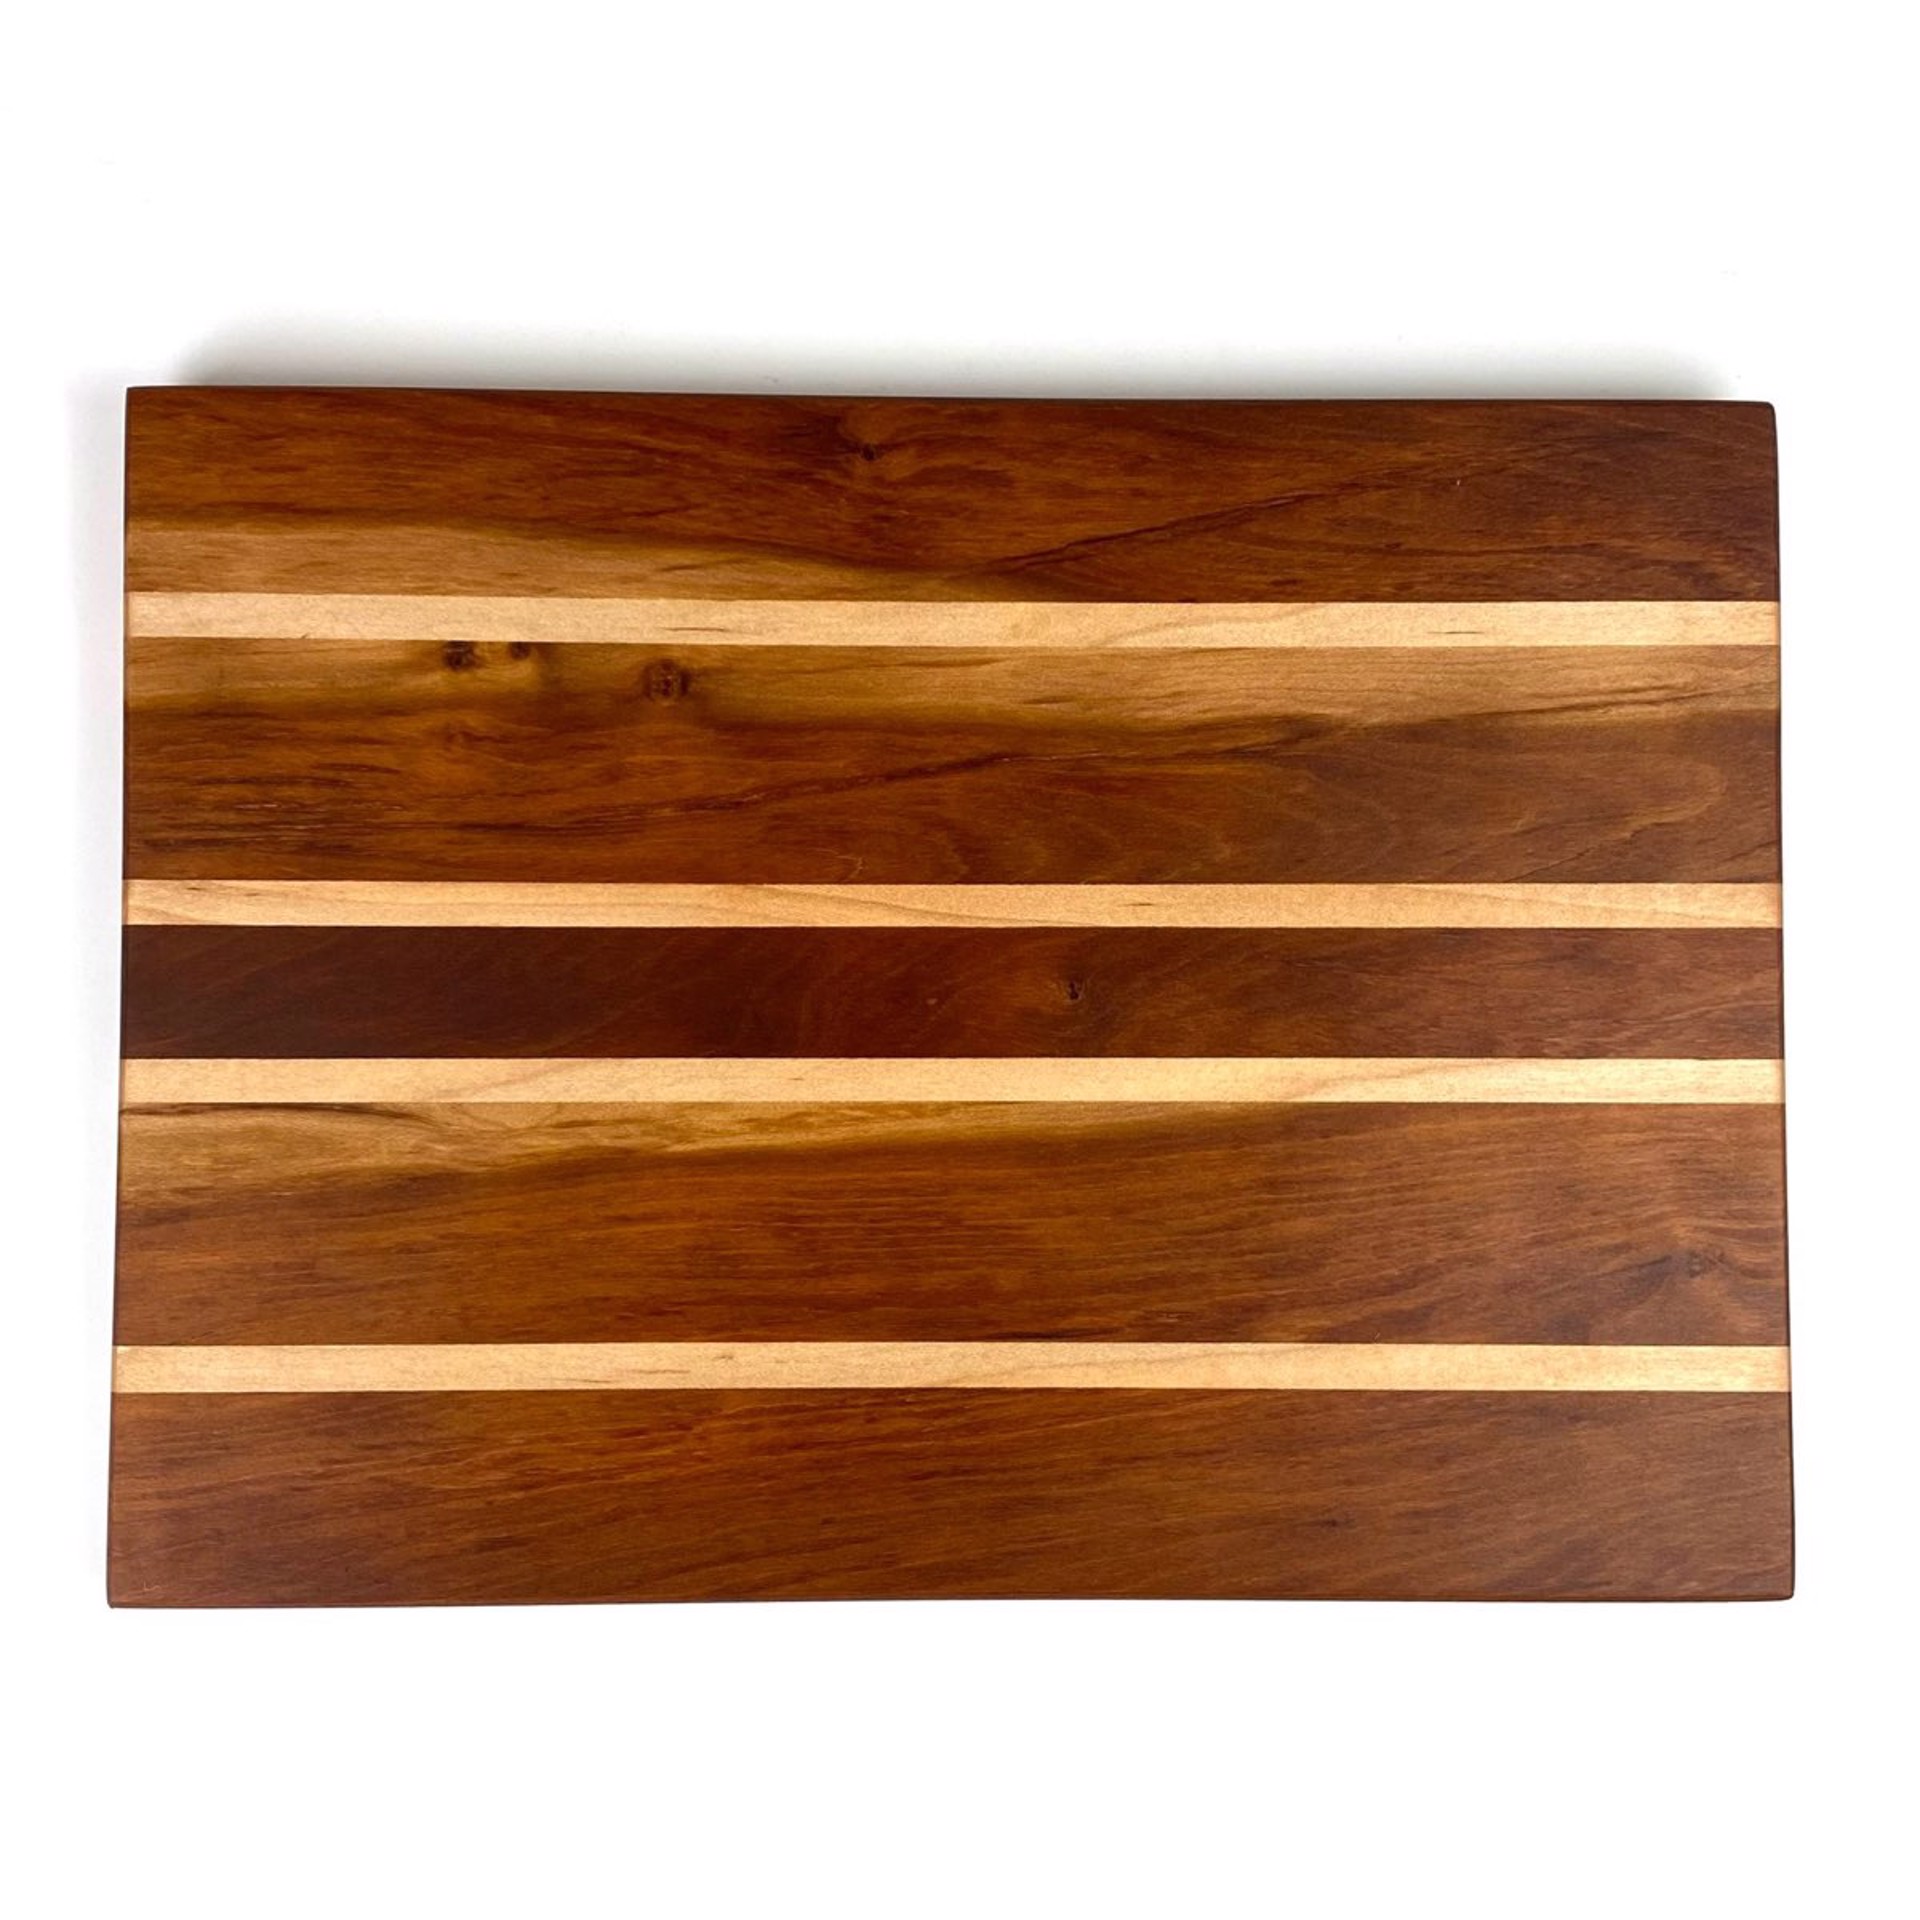 Maple and Cherry Rectangle Board by Jon Cordes